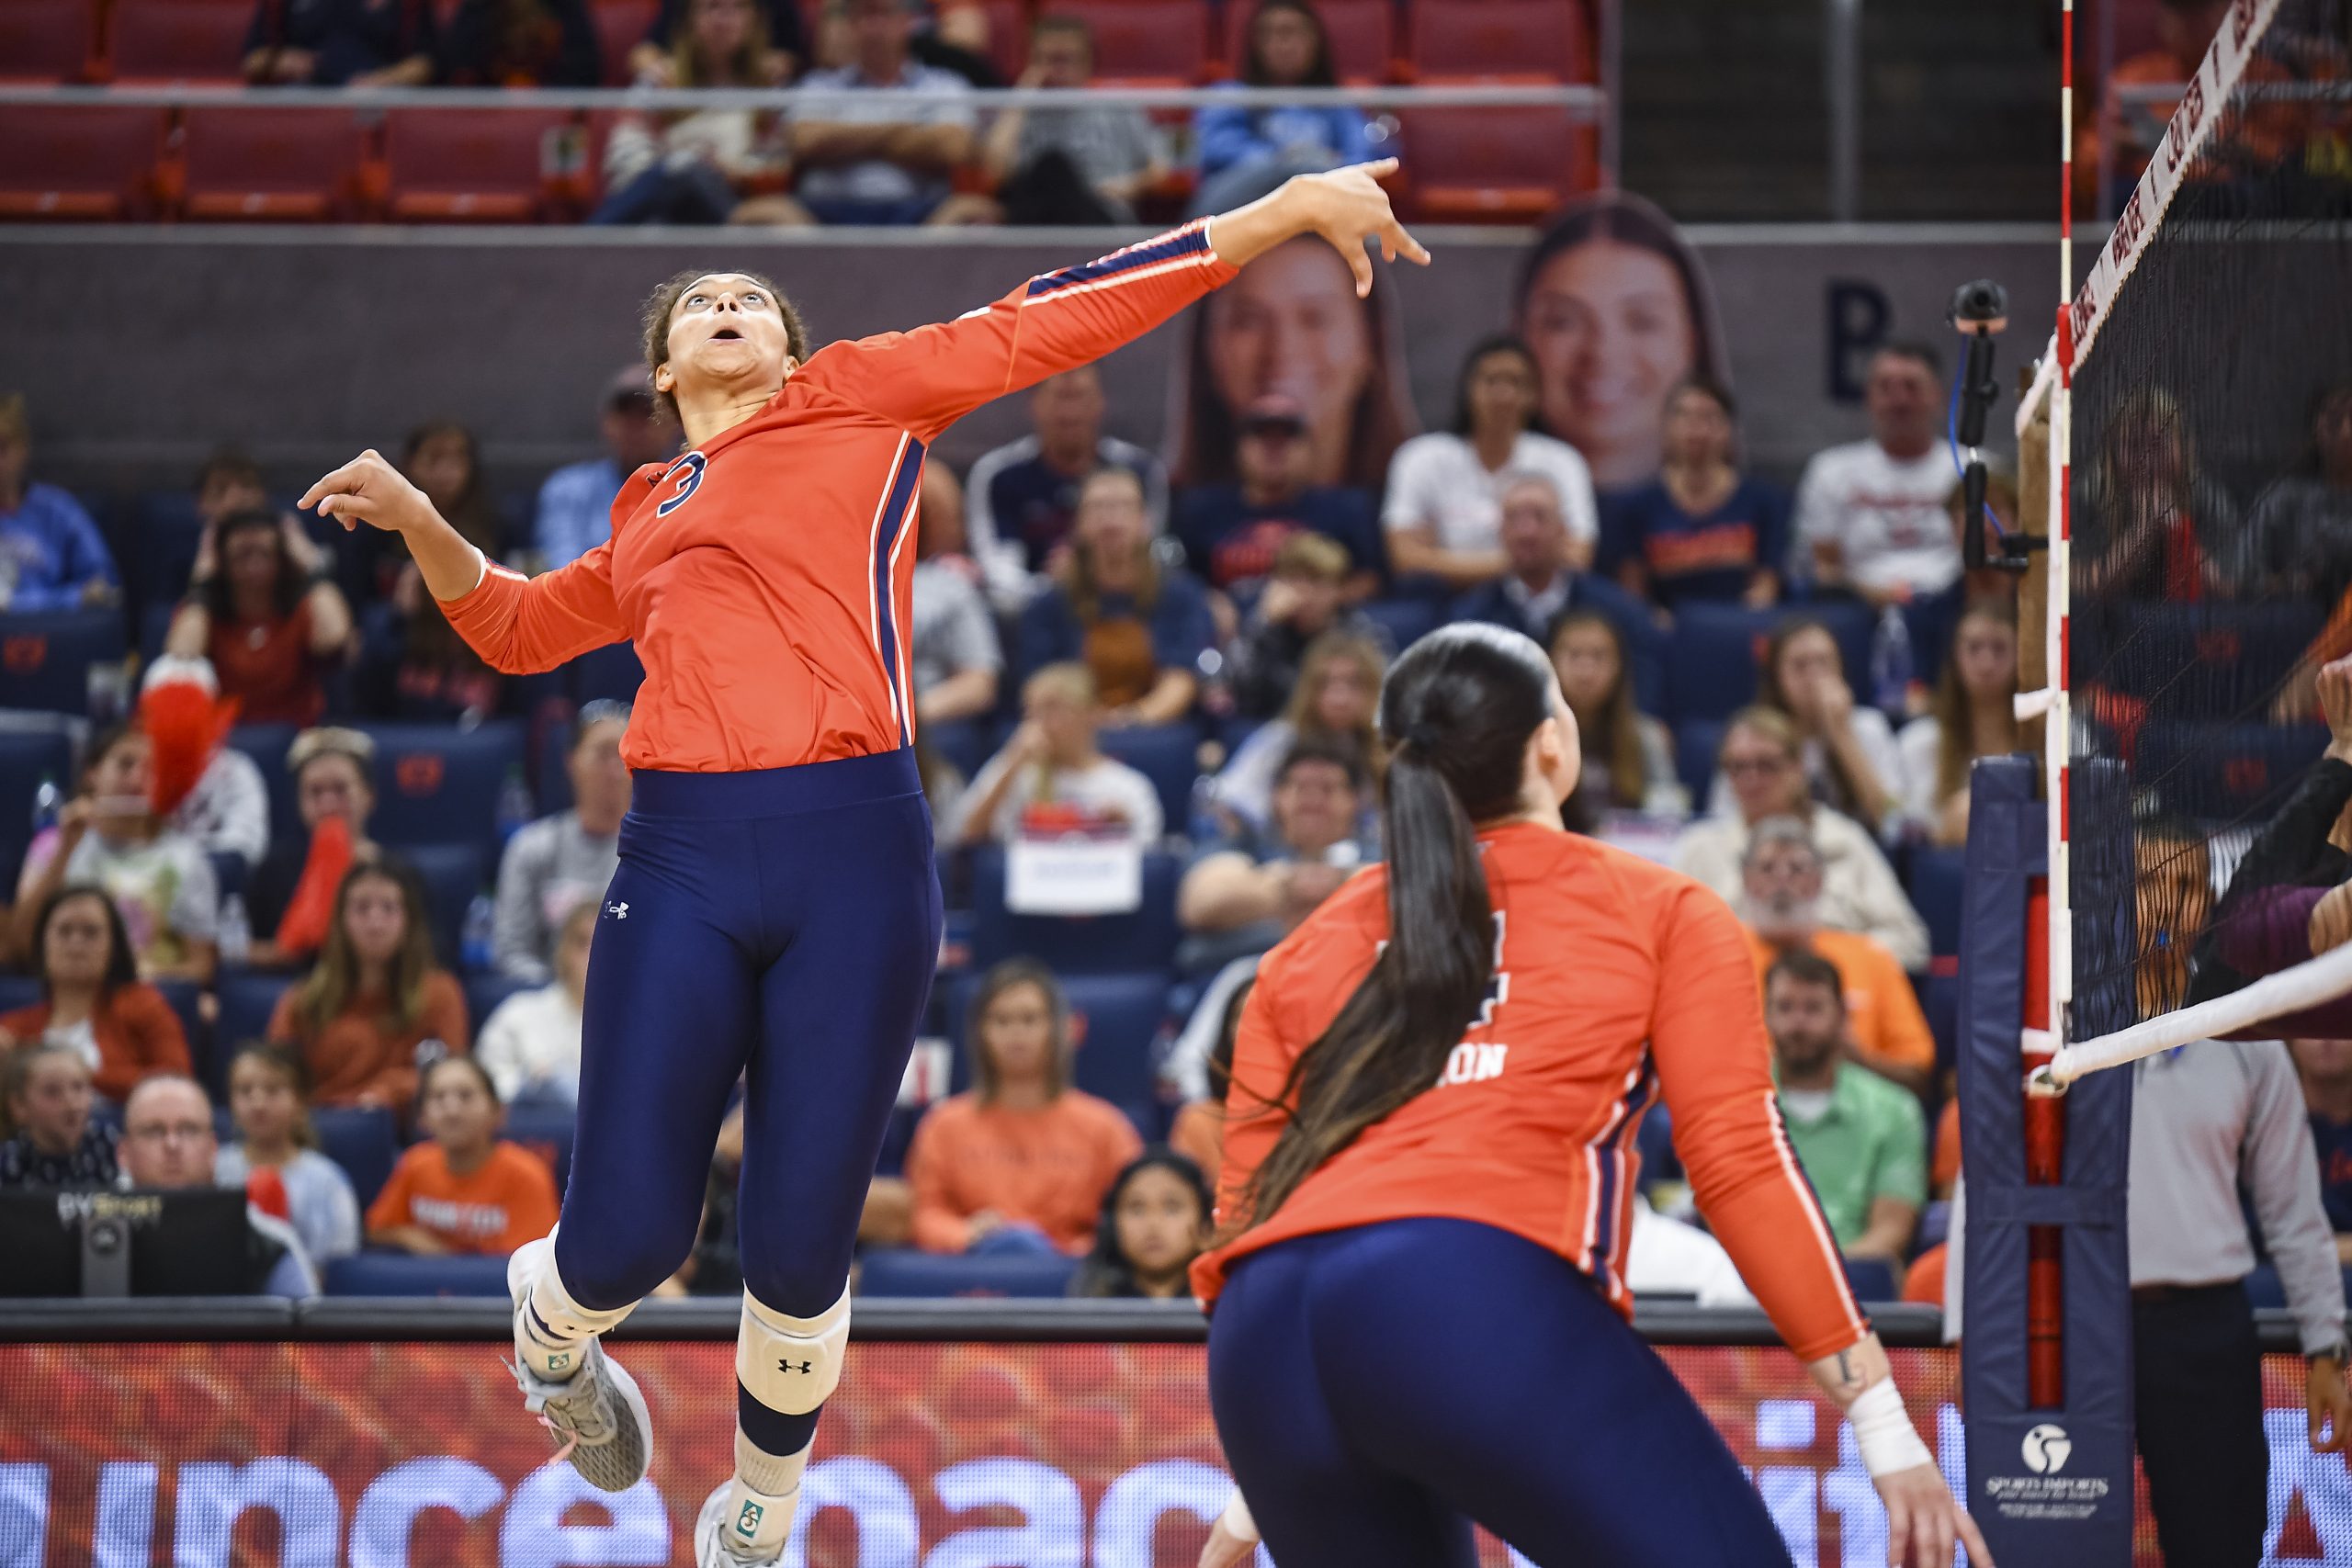 AUBURN VOLLEYBALL: Tigers Look For Rare Back-to-Back Winning Seasons